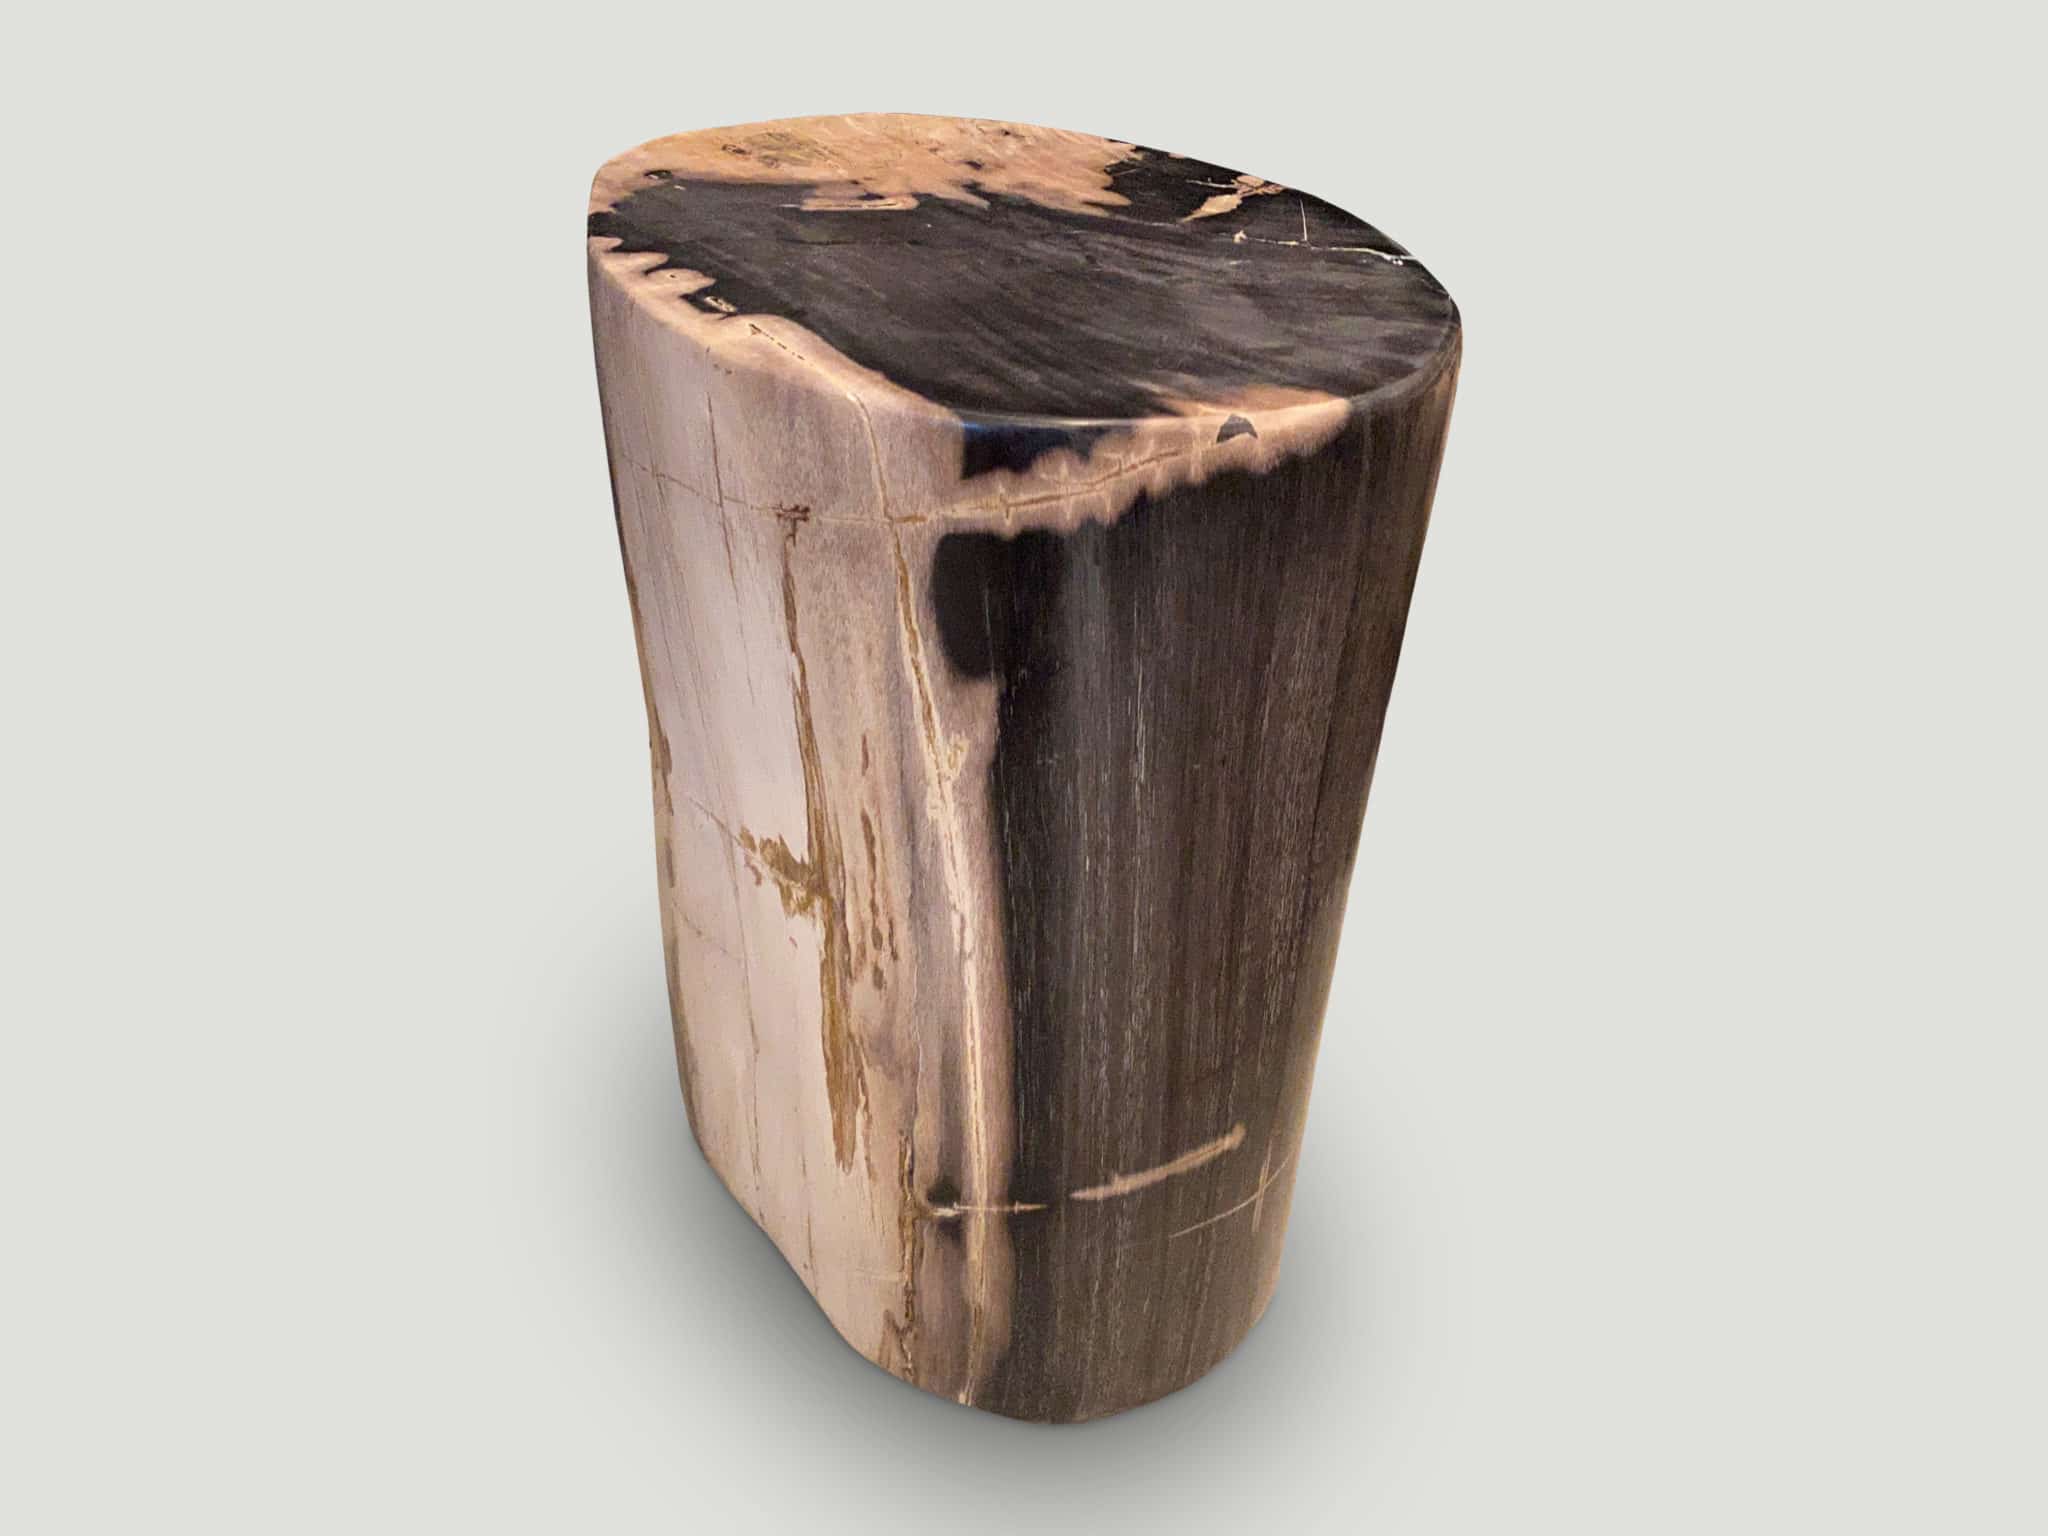 EXQUISITE HIGH QUALITY PETRIFIED WOOD SIDE TABLE